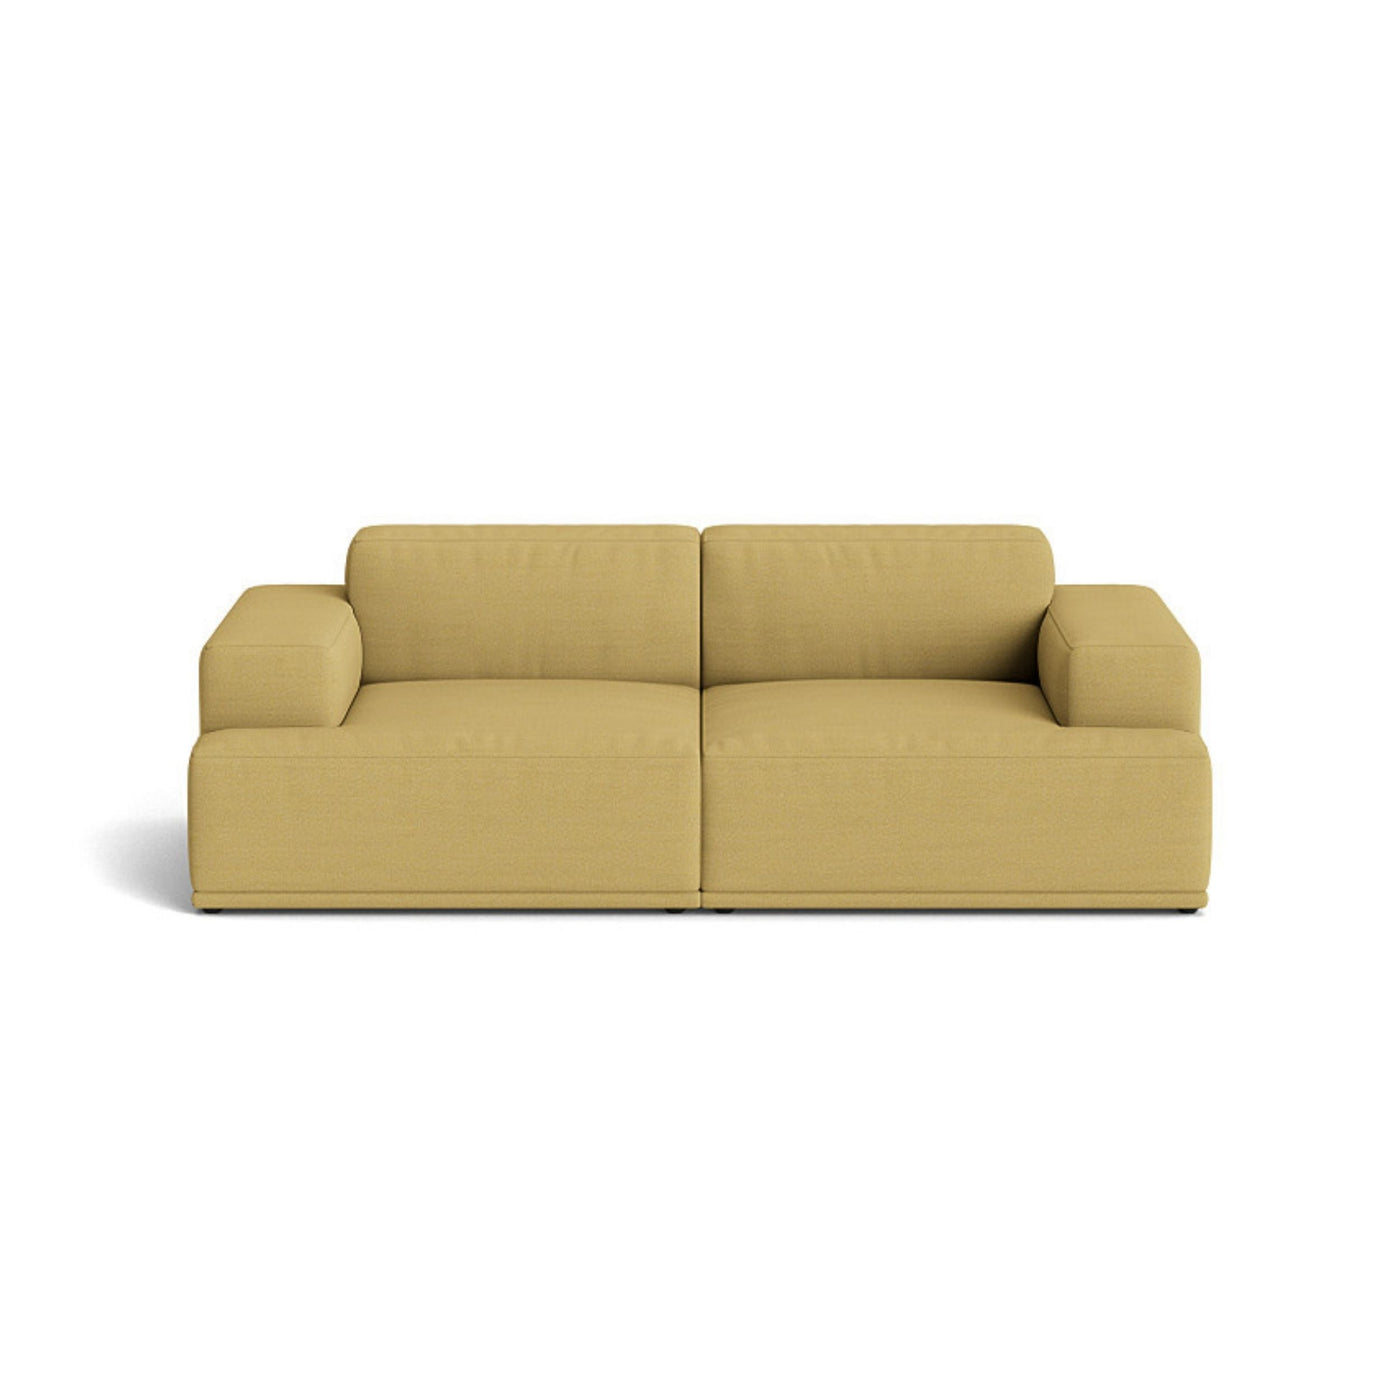 Muuto Connect Soft Modular 2 Seater Sofa, configuration 1. made-to-order from someday designs. #colour_hallingdal-407